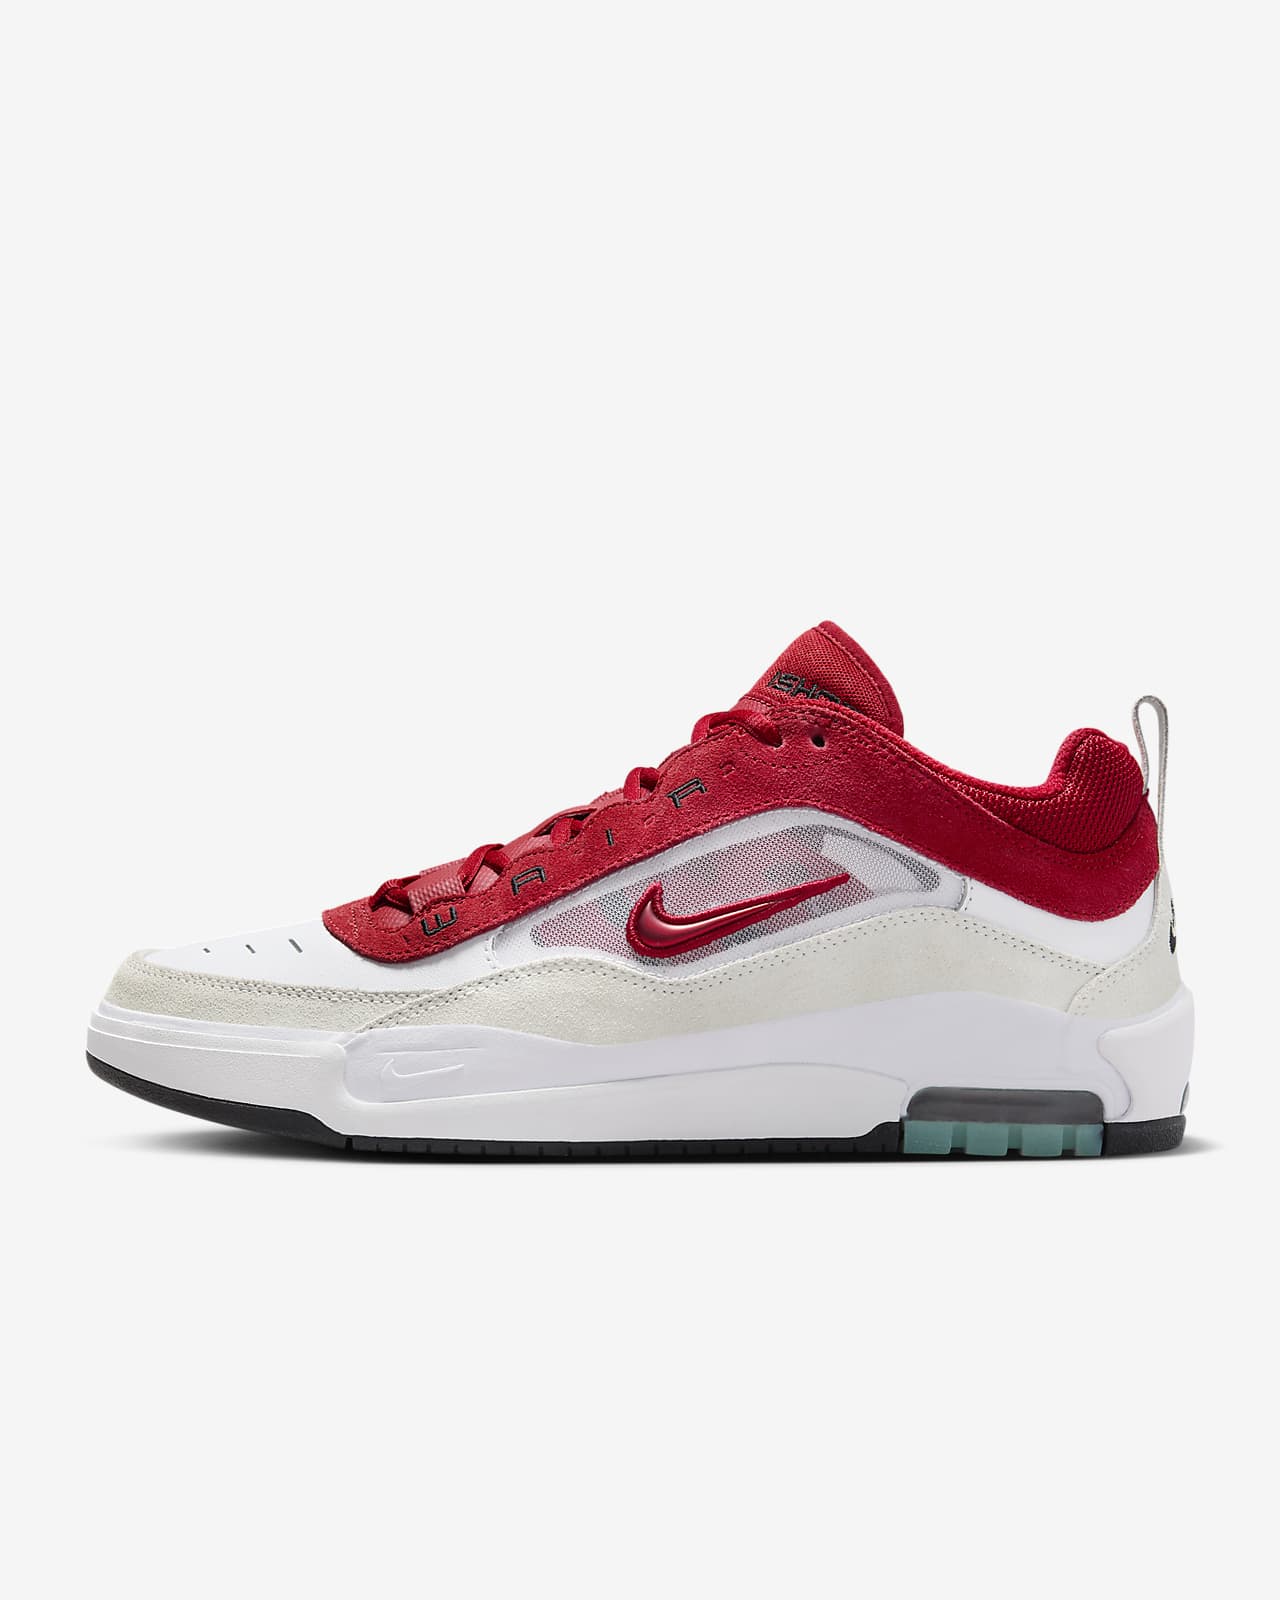 Chaussure Nike Air Max Ishod pour homme